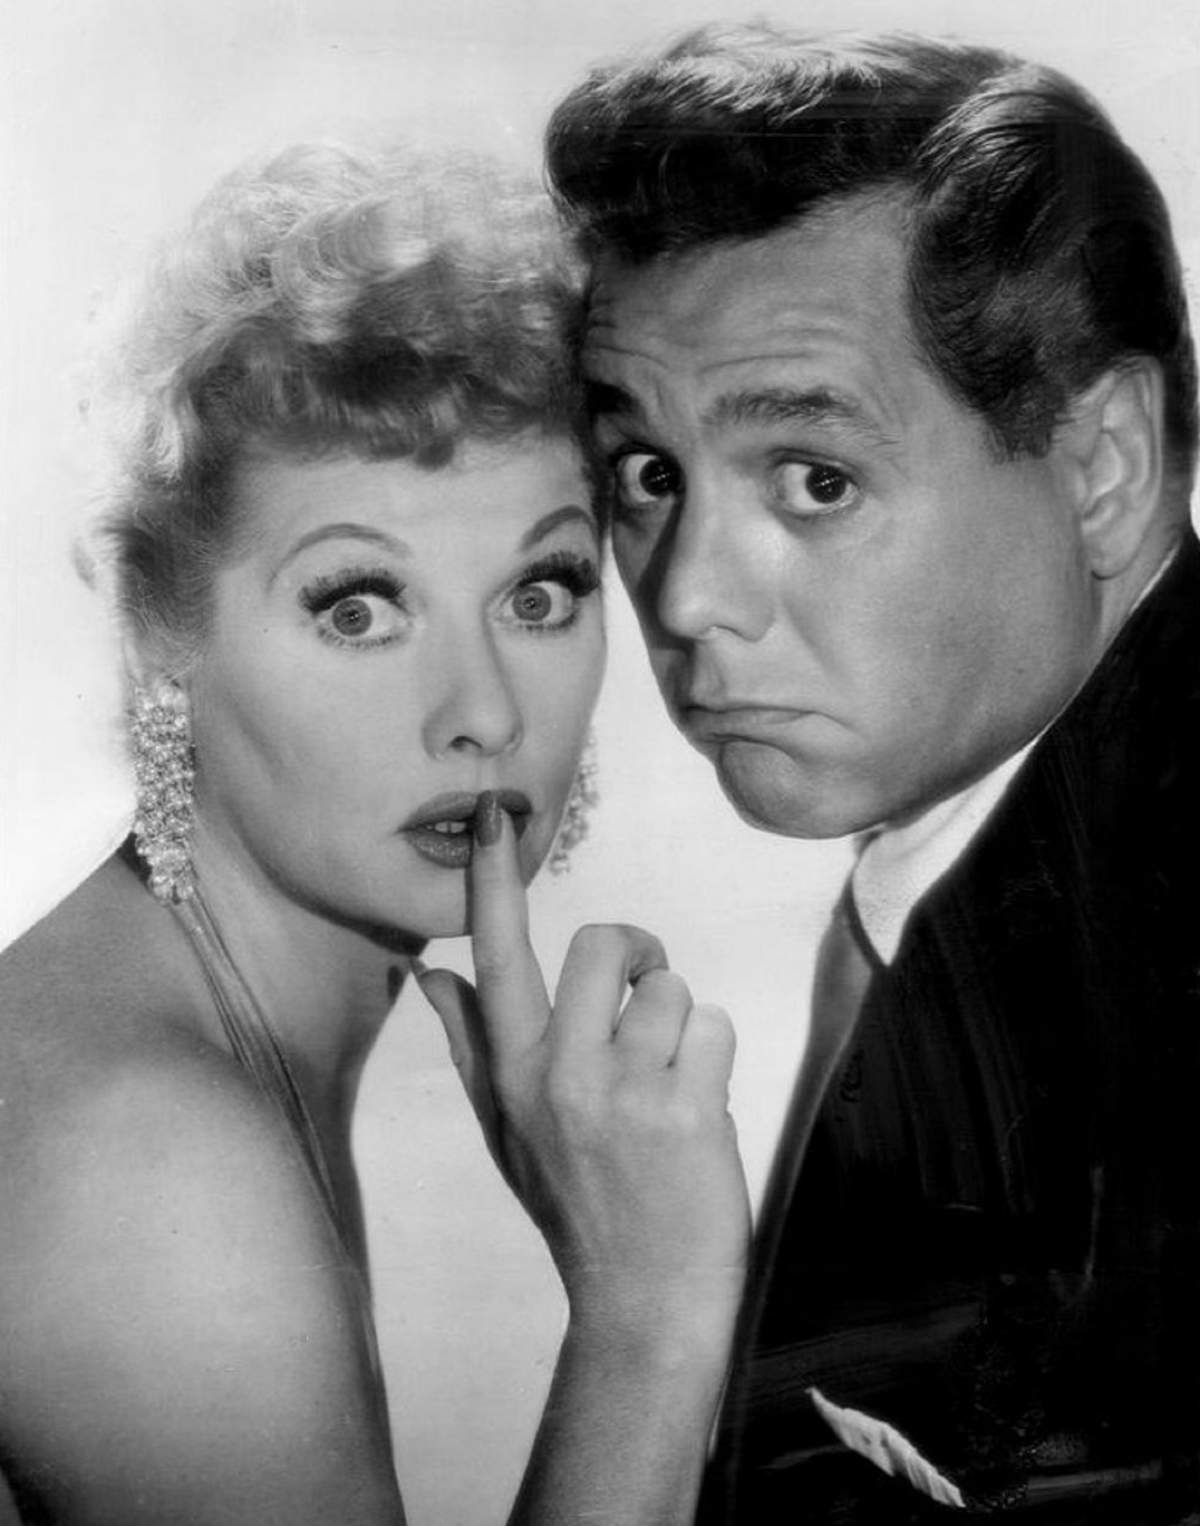 Relationships - From The Male Perspective  "I Love Lucy" Day